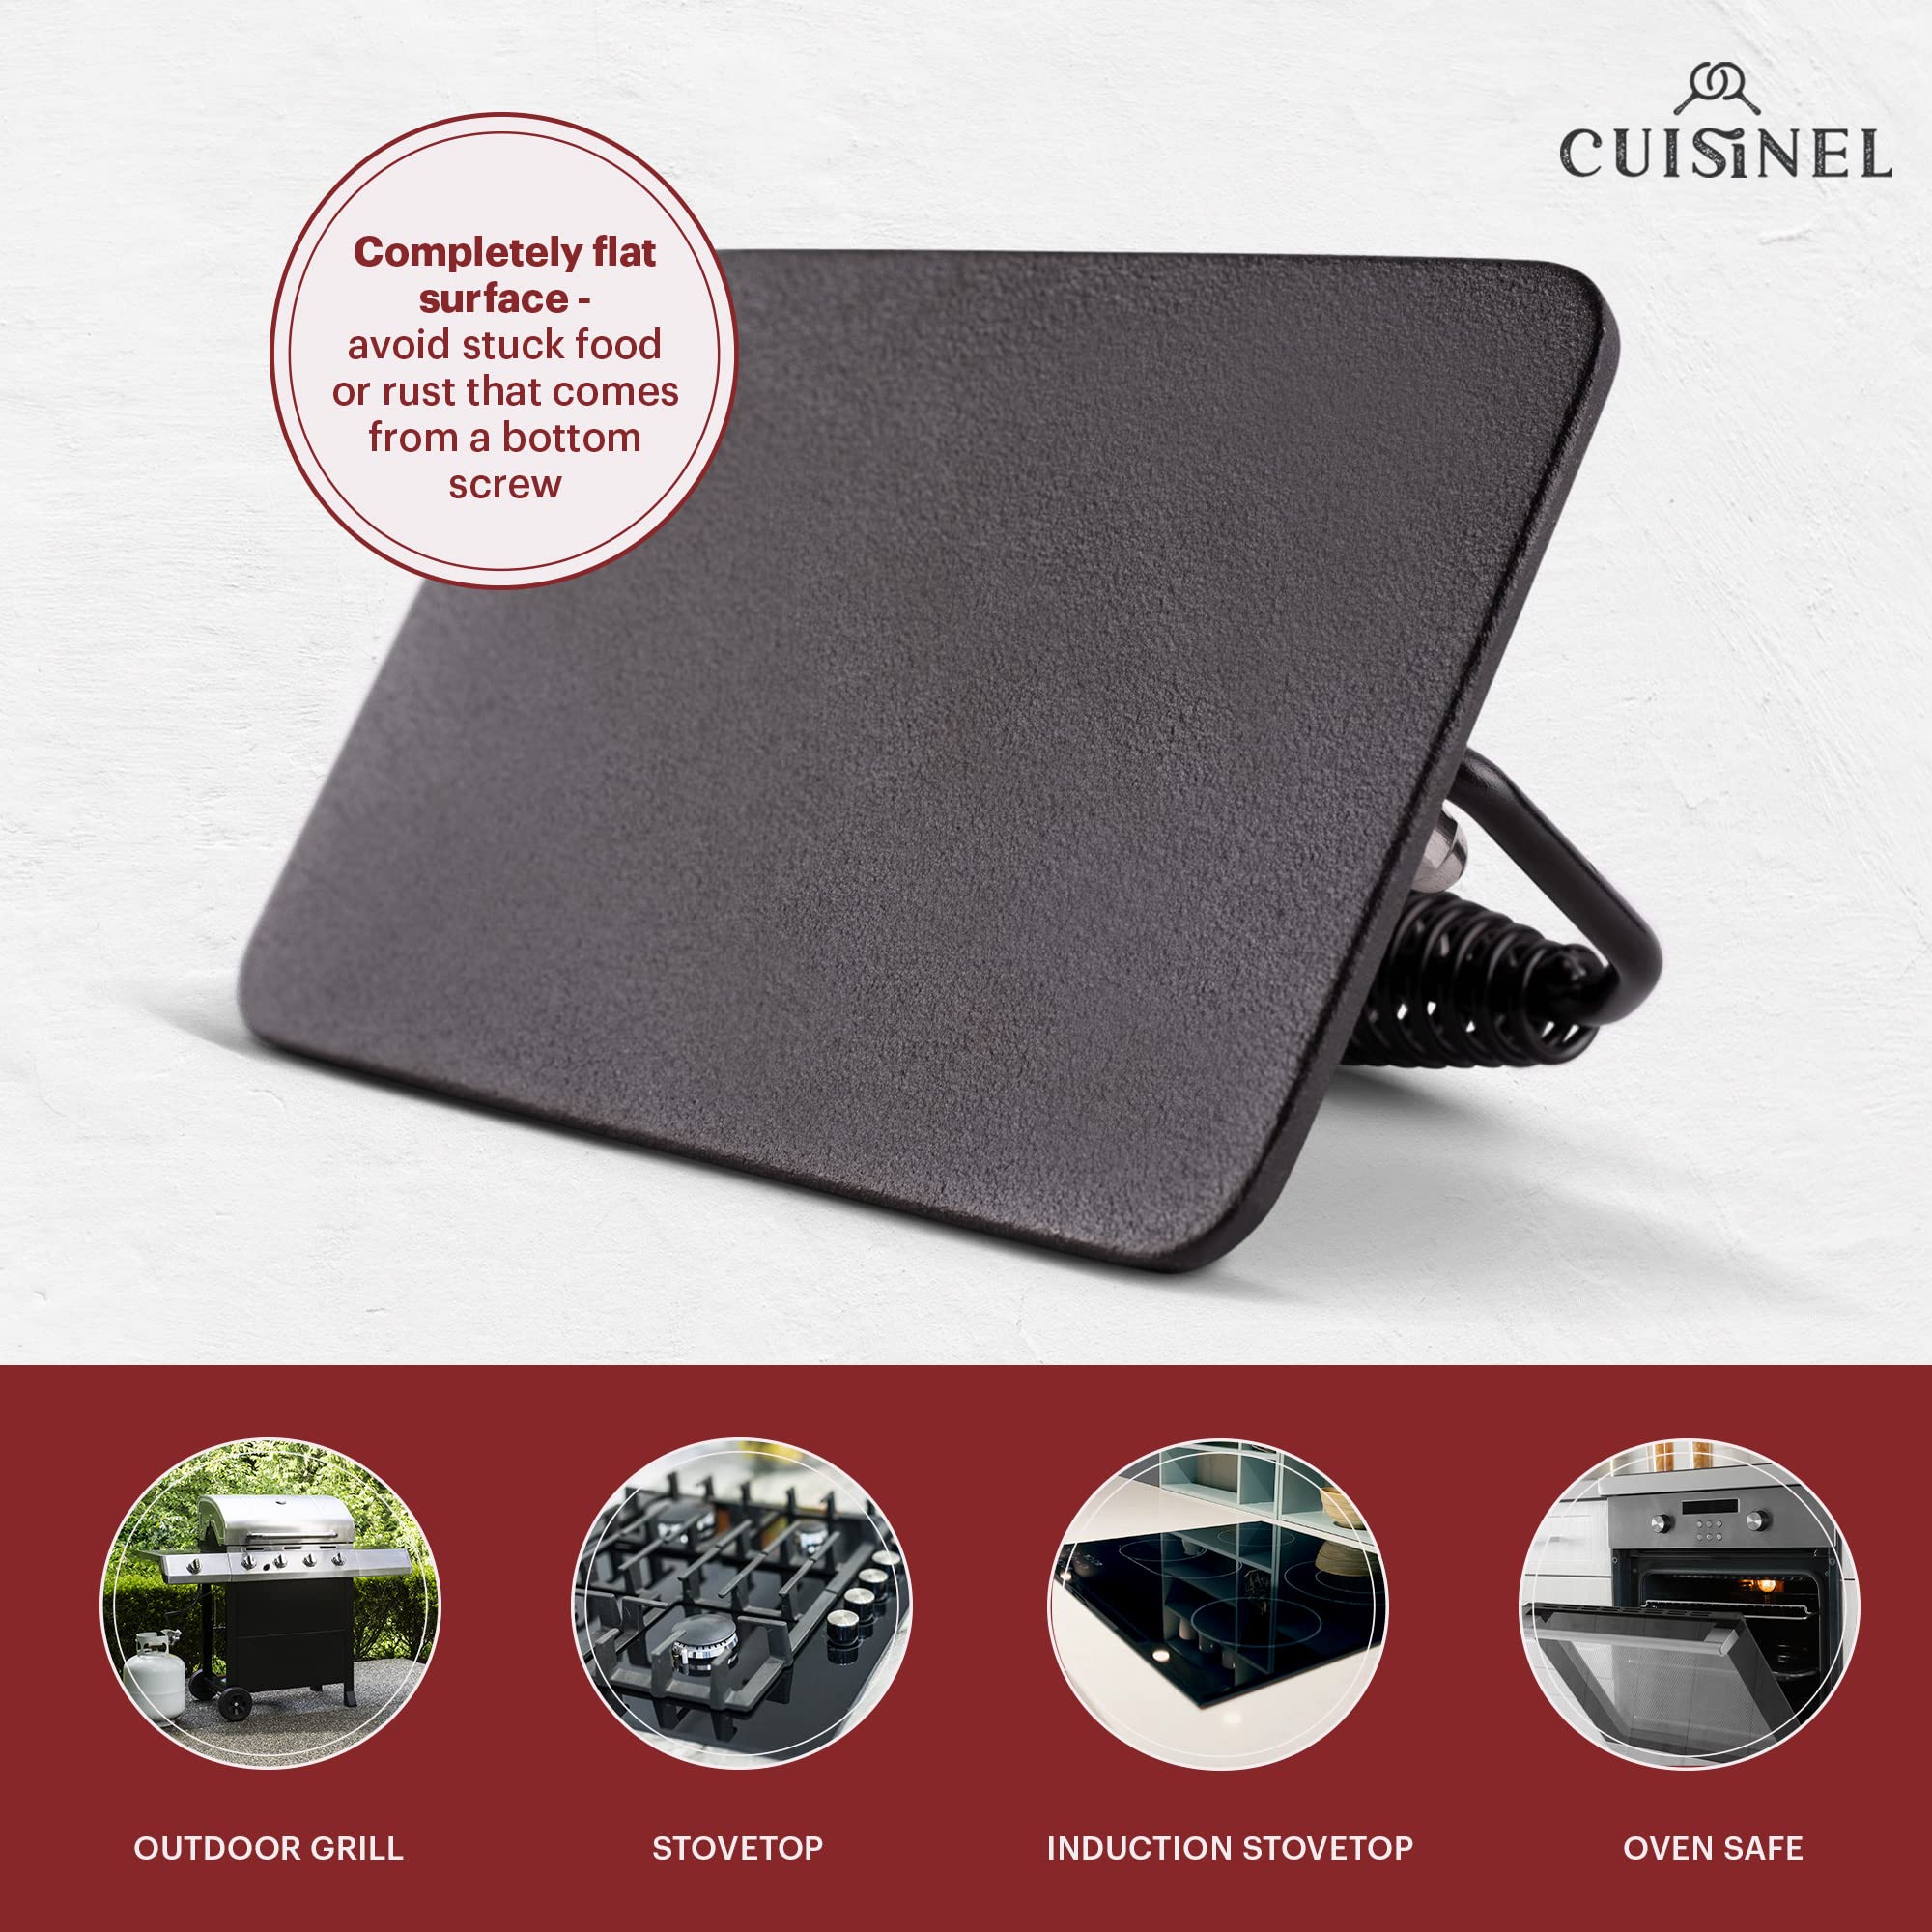 Cuisinel Cast Iron Griddle/Grill - Pre-Seasoned Reversible Blackstone Cover BBQ Accessories + Burger Hamburger Press Smasher + Pan Scraper/Cleaner for Skillets Frying Pans - Indoor/Outdoor  - Good